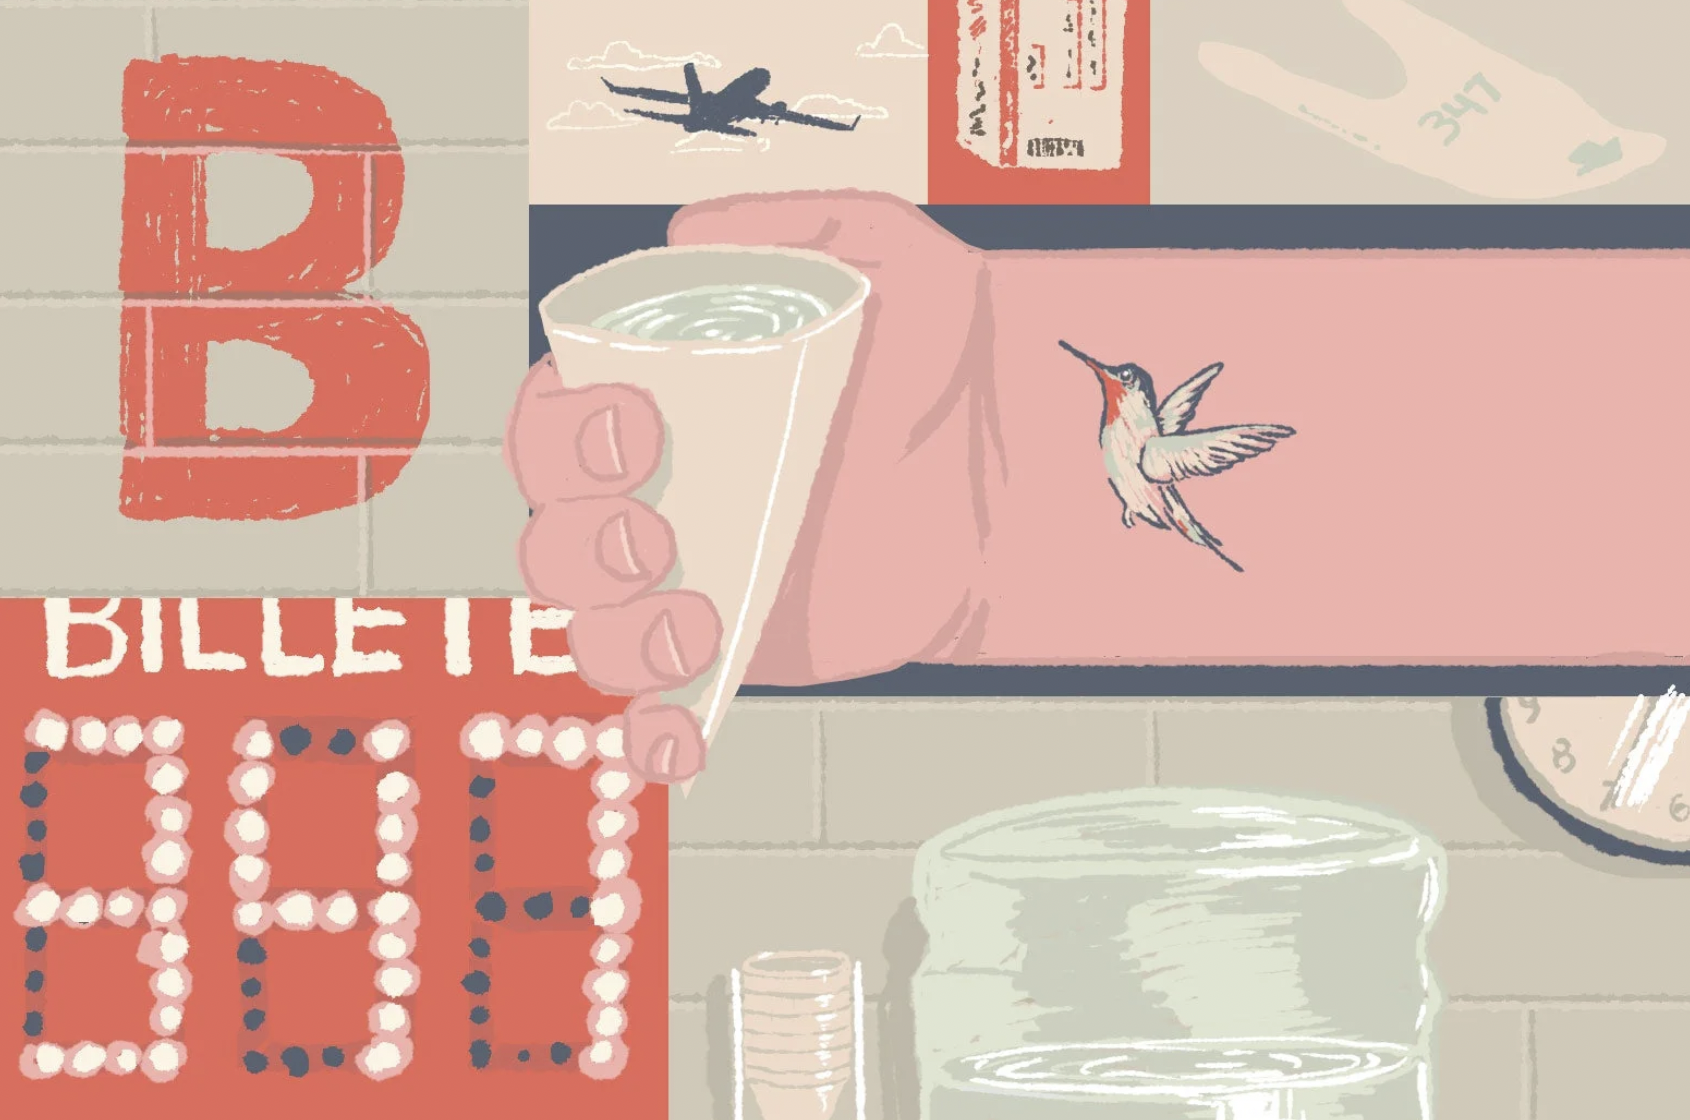 A collection of disparate images in a grid: an upper-case letter B, a lighted number sign denoting your place in line, a water cooler and hand holding a paper conical cup, an airplane, a hummingbird.